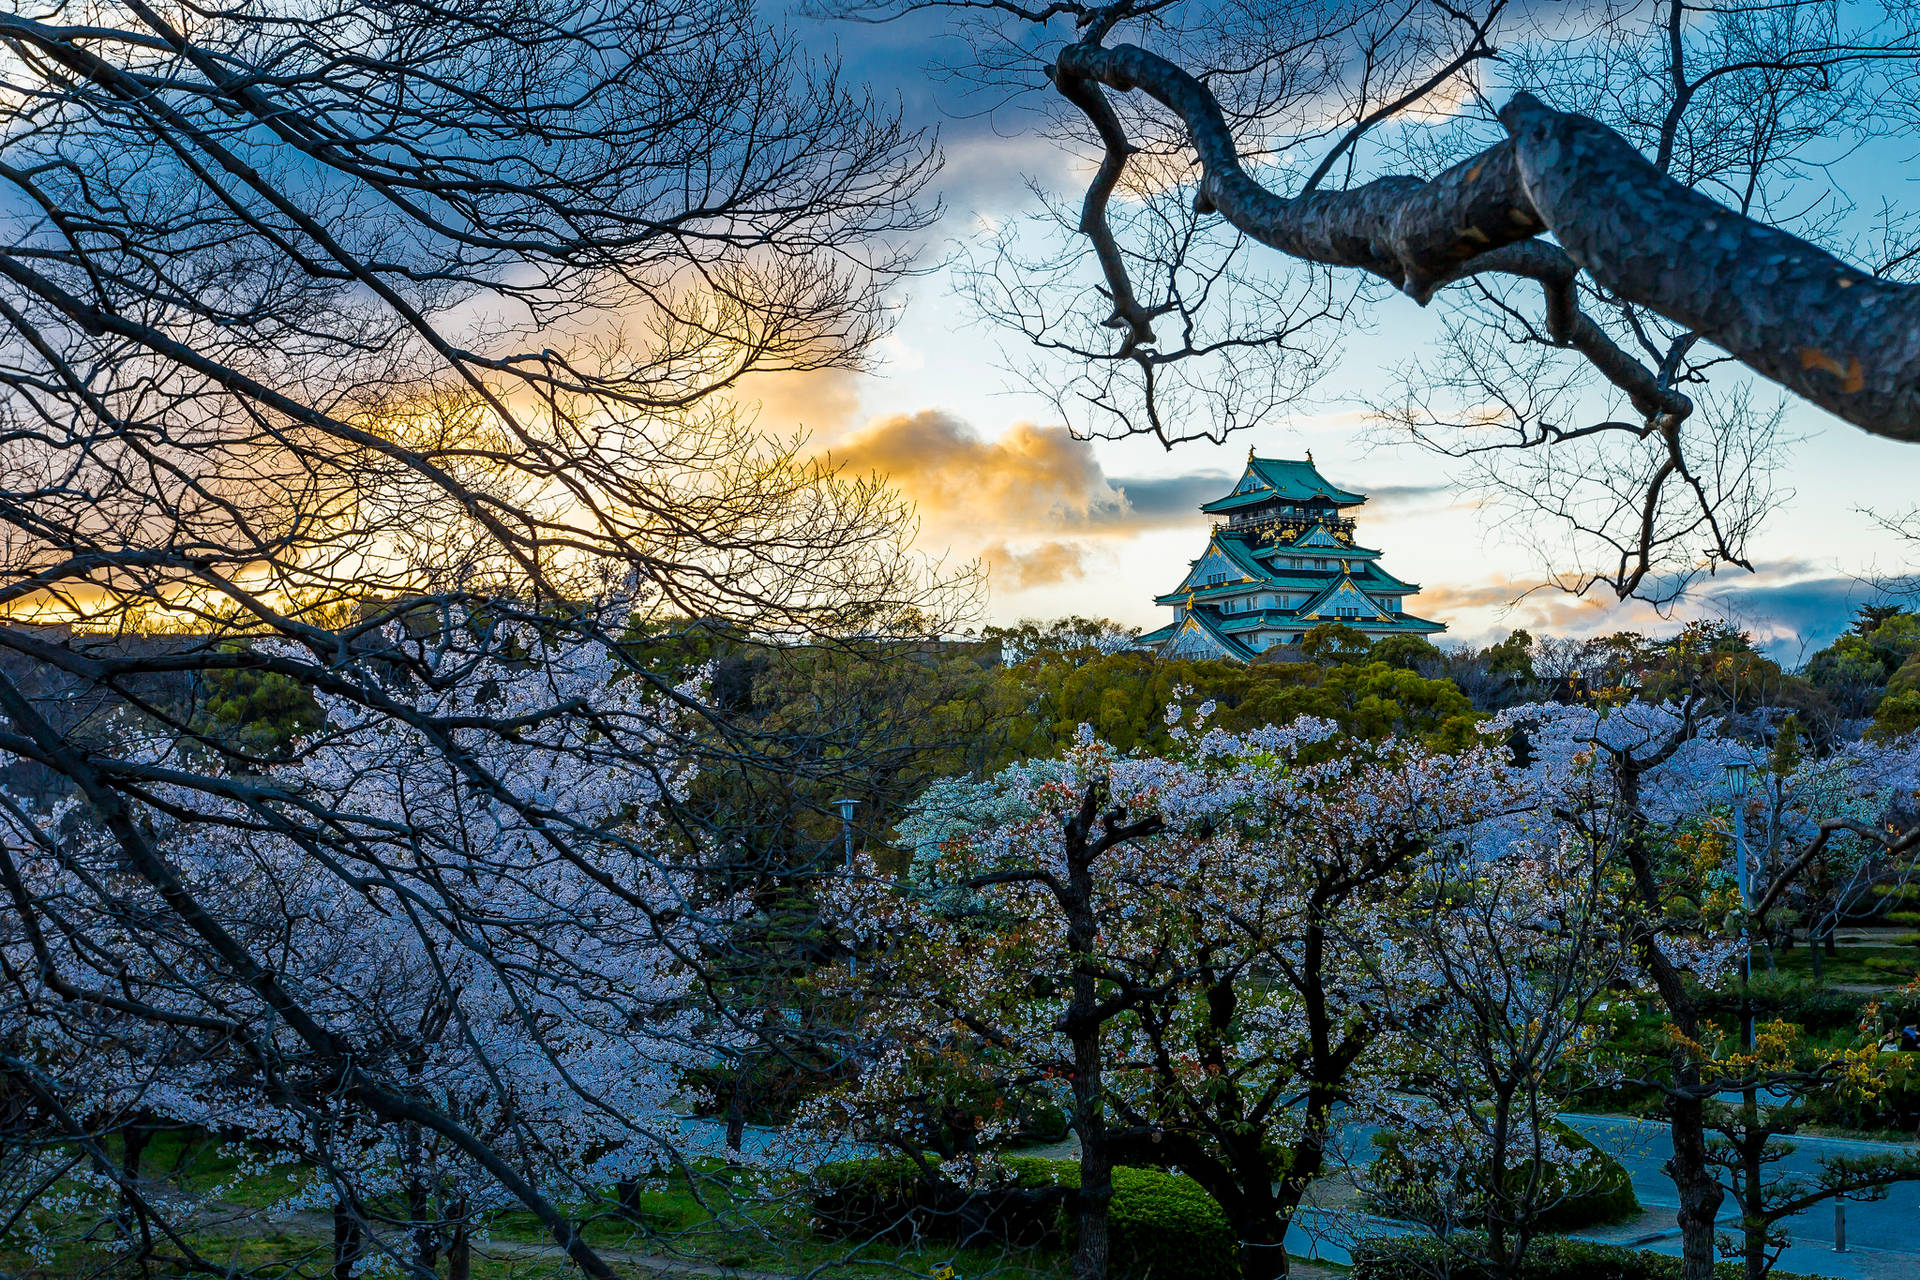 Osaka Castle Picturesque View